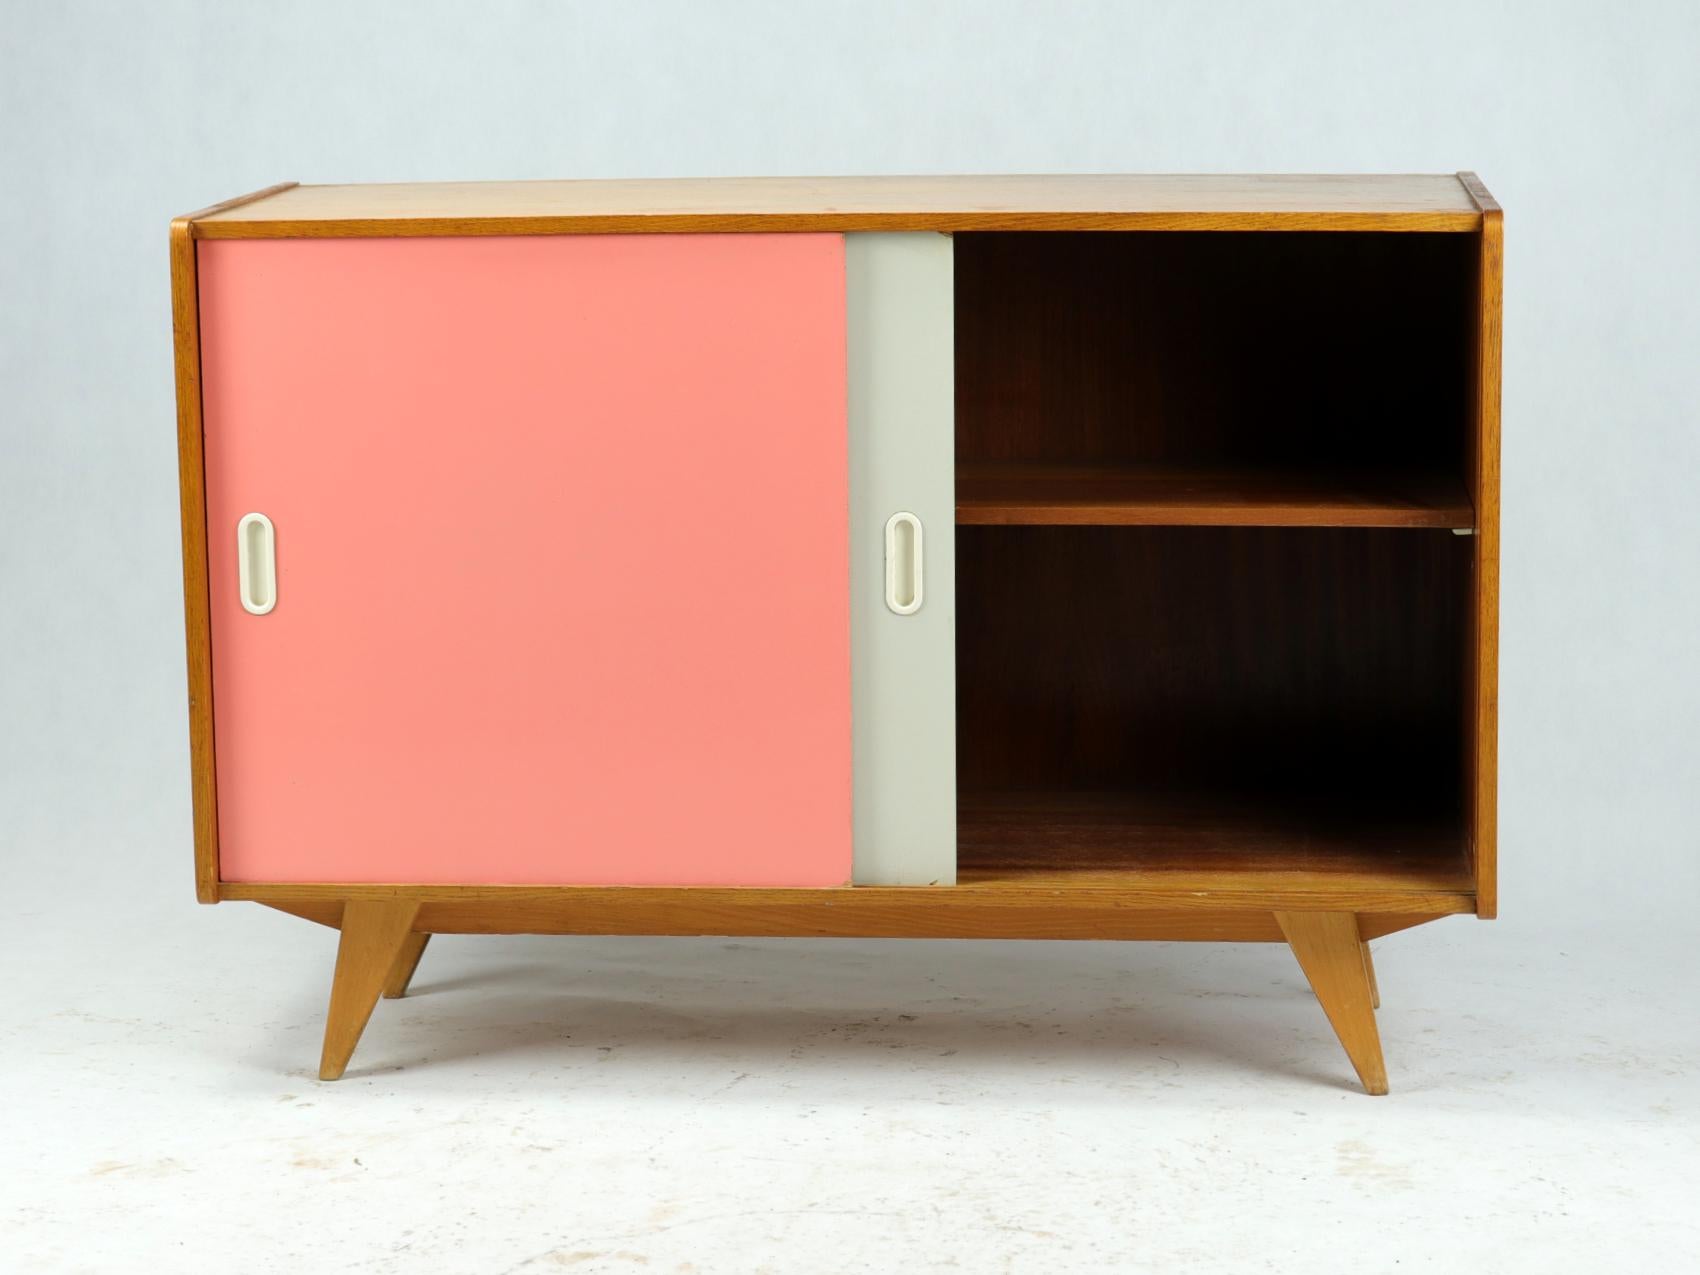 Elegant sideboard typical for the midcentury era in Czechoslovakia. Designed by Jiri Jiroutek in 1960s, this U450 type sideboar has sliding doors. These are iconic for the designer who was the first one to combine classical wooden box with fresh and